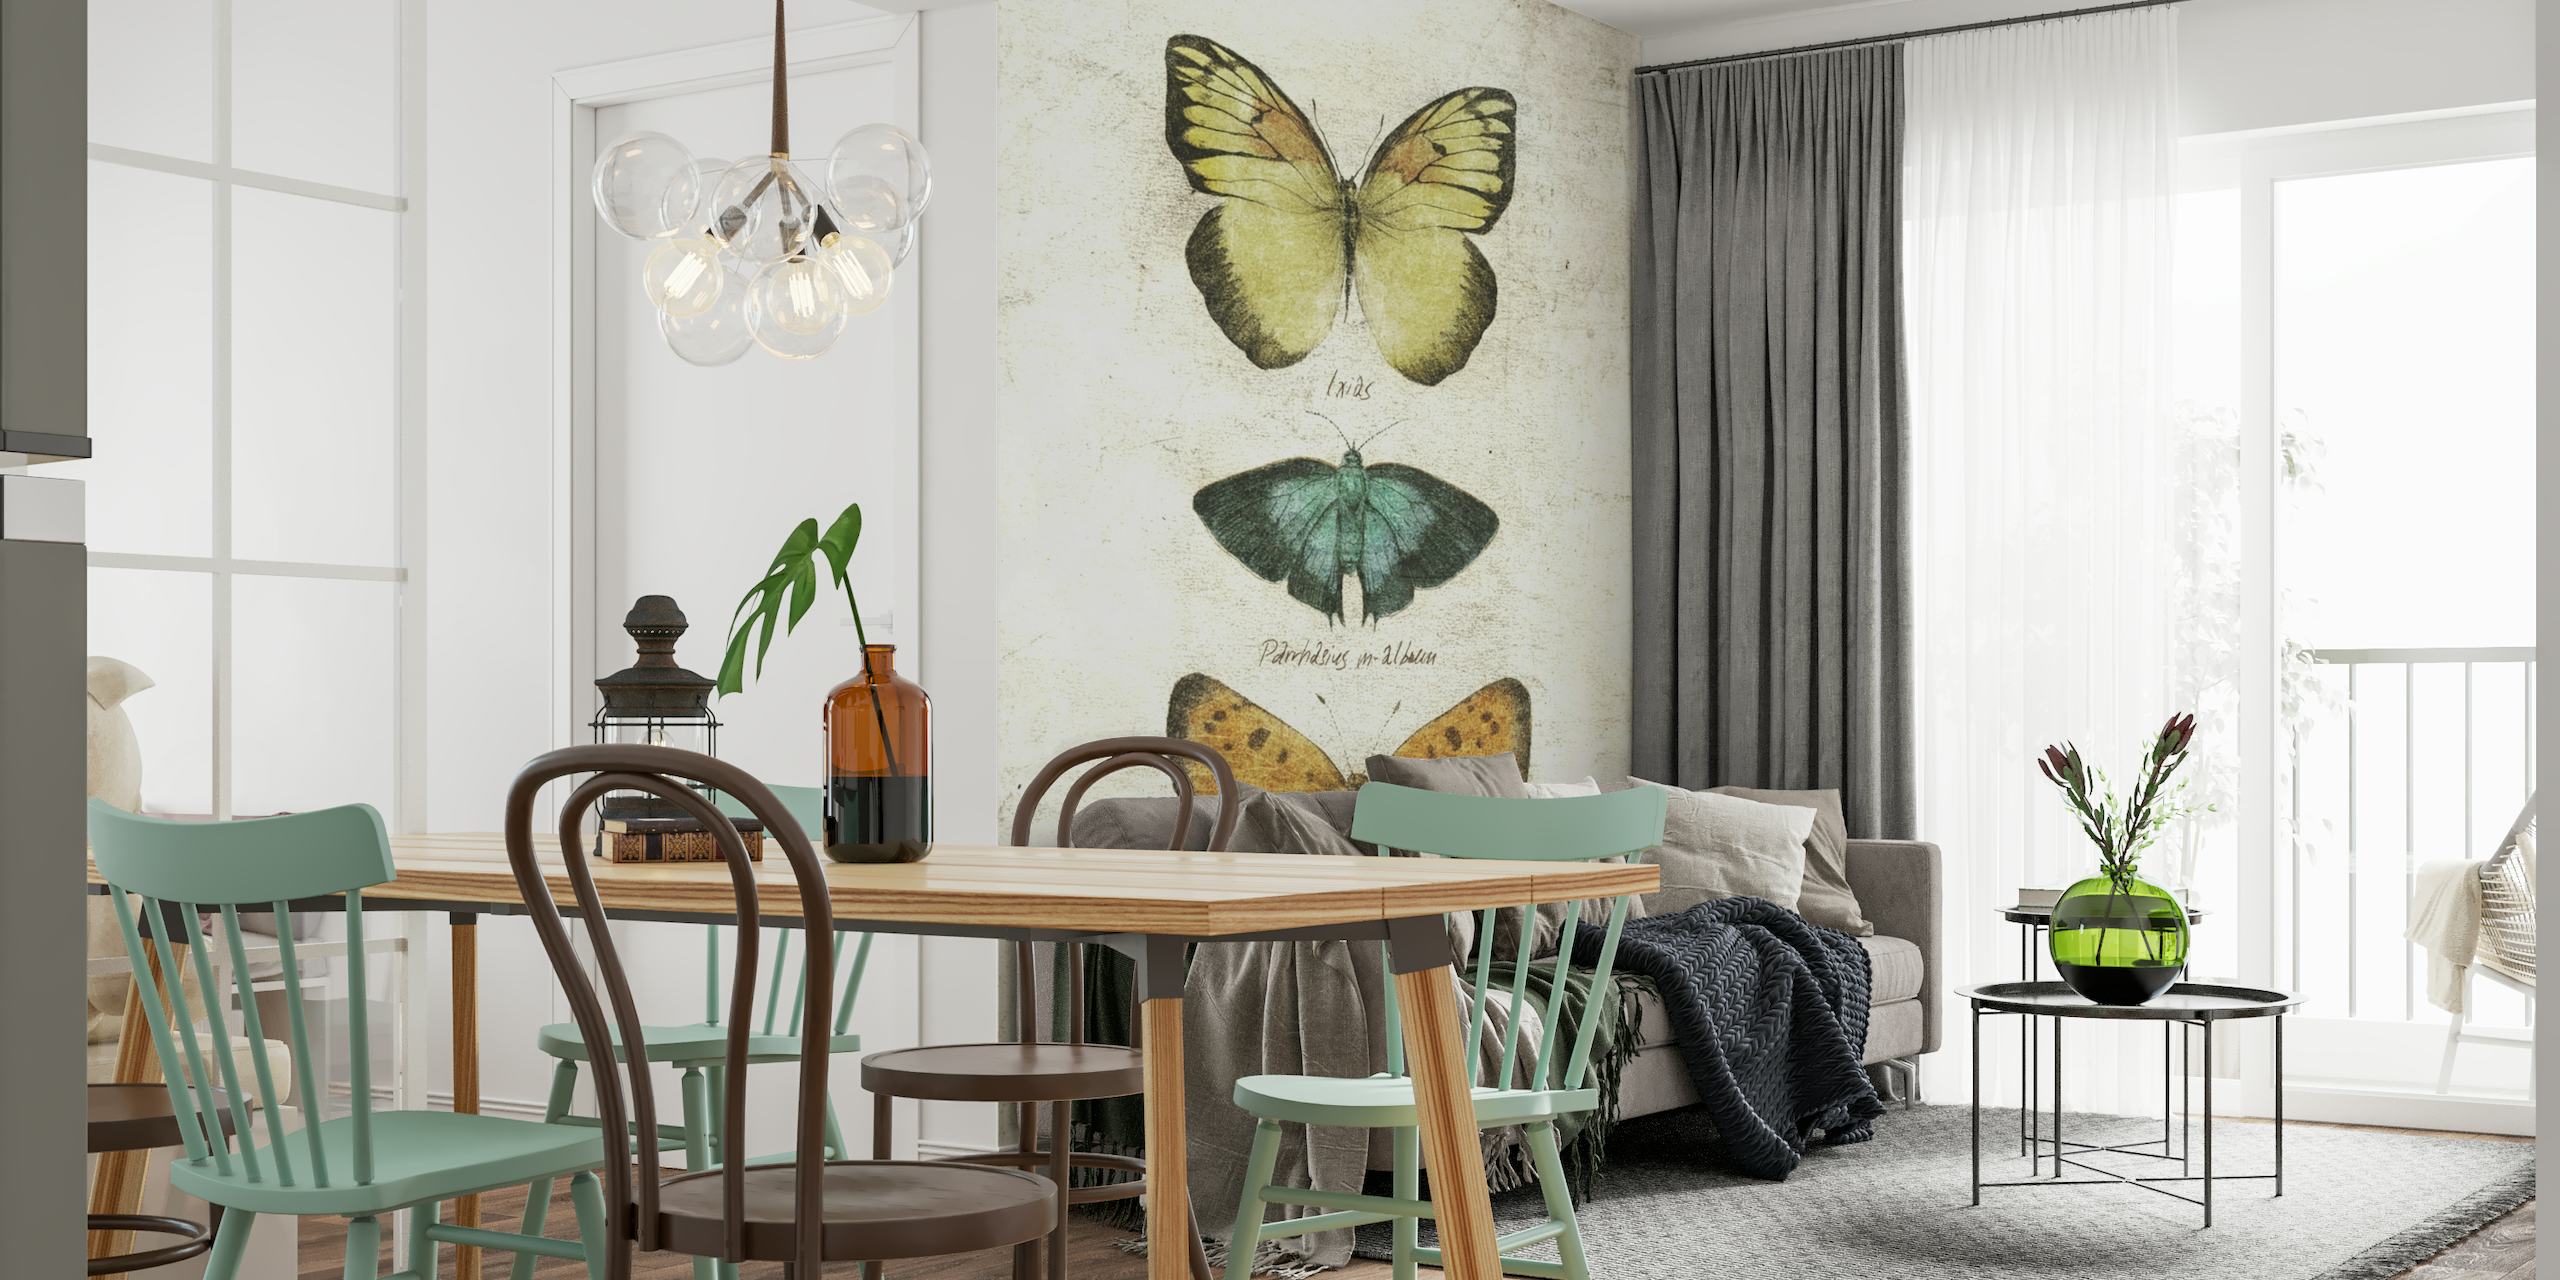 Vintage butterflies mural with three different species in a vertical arrangement on textured background